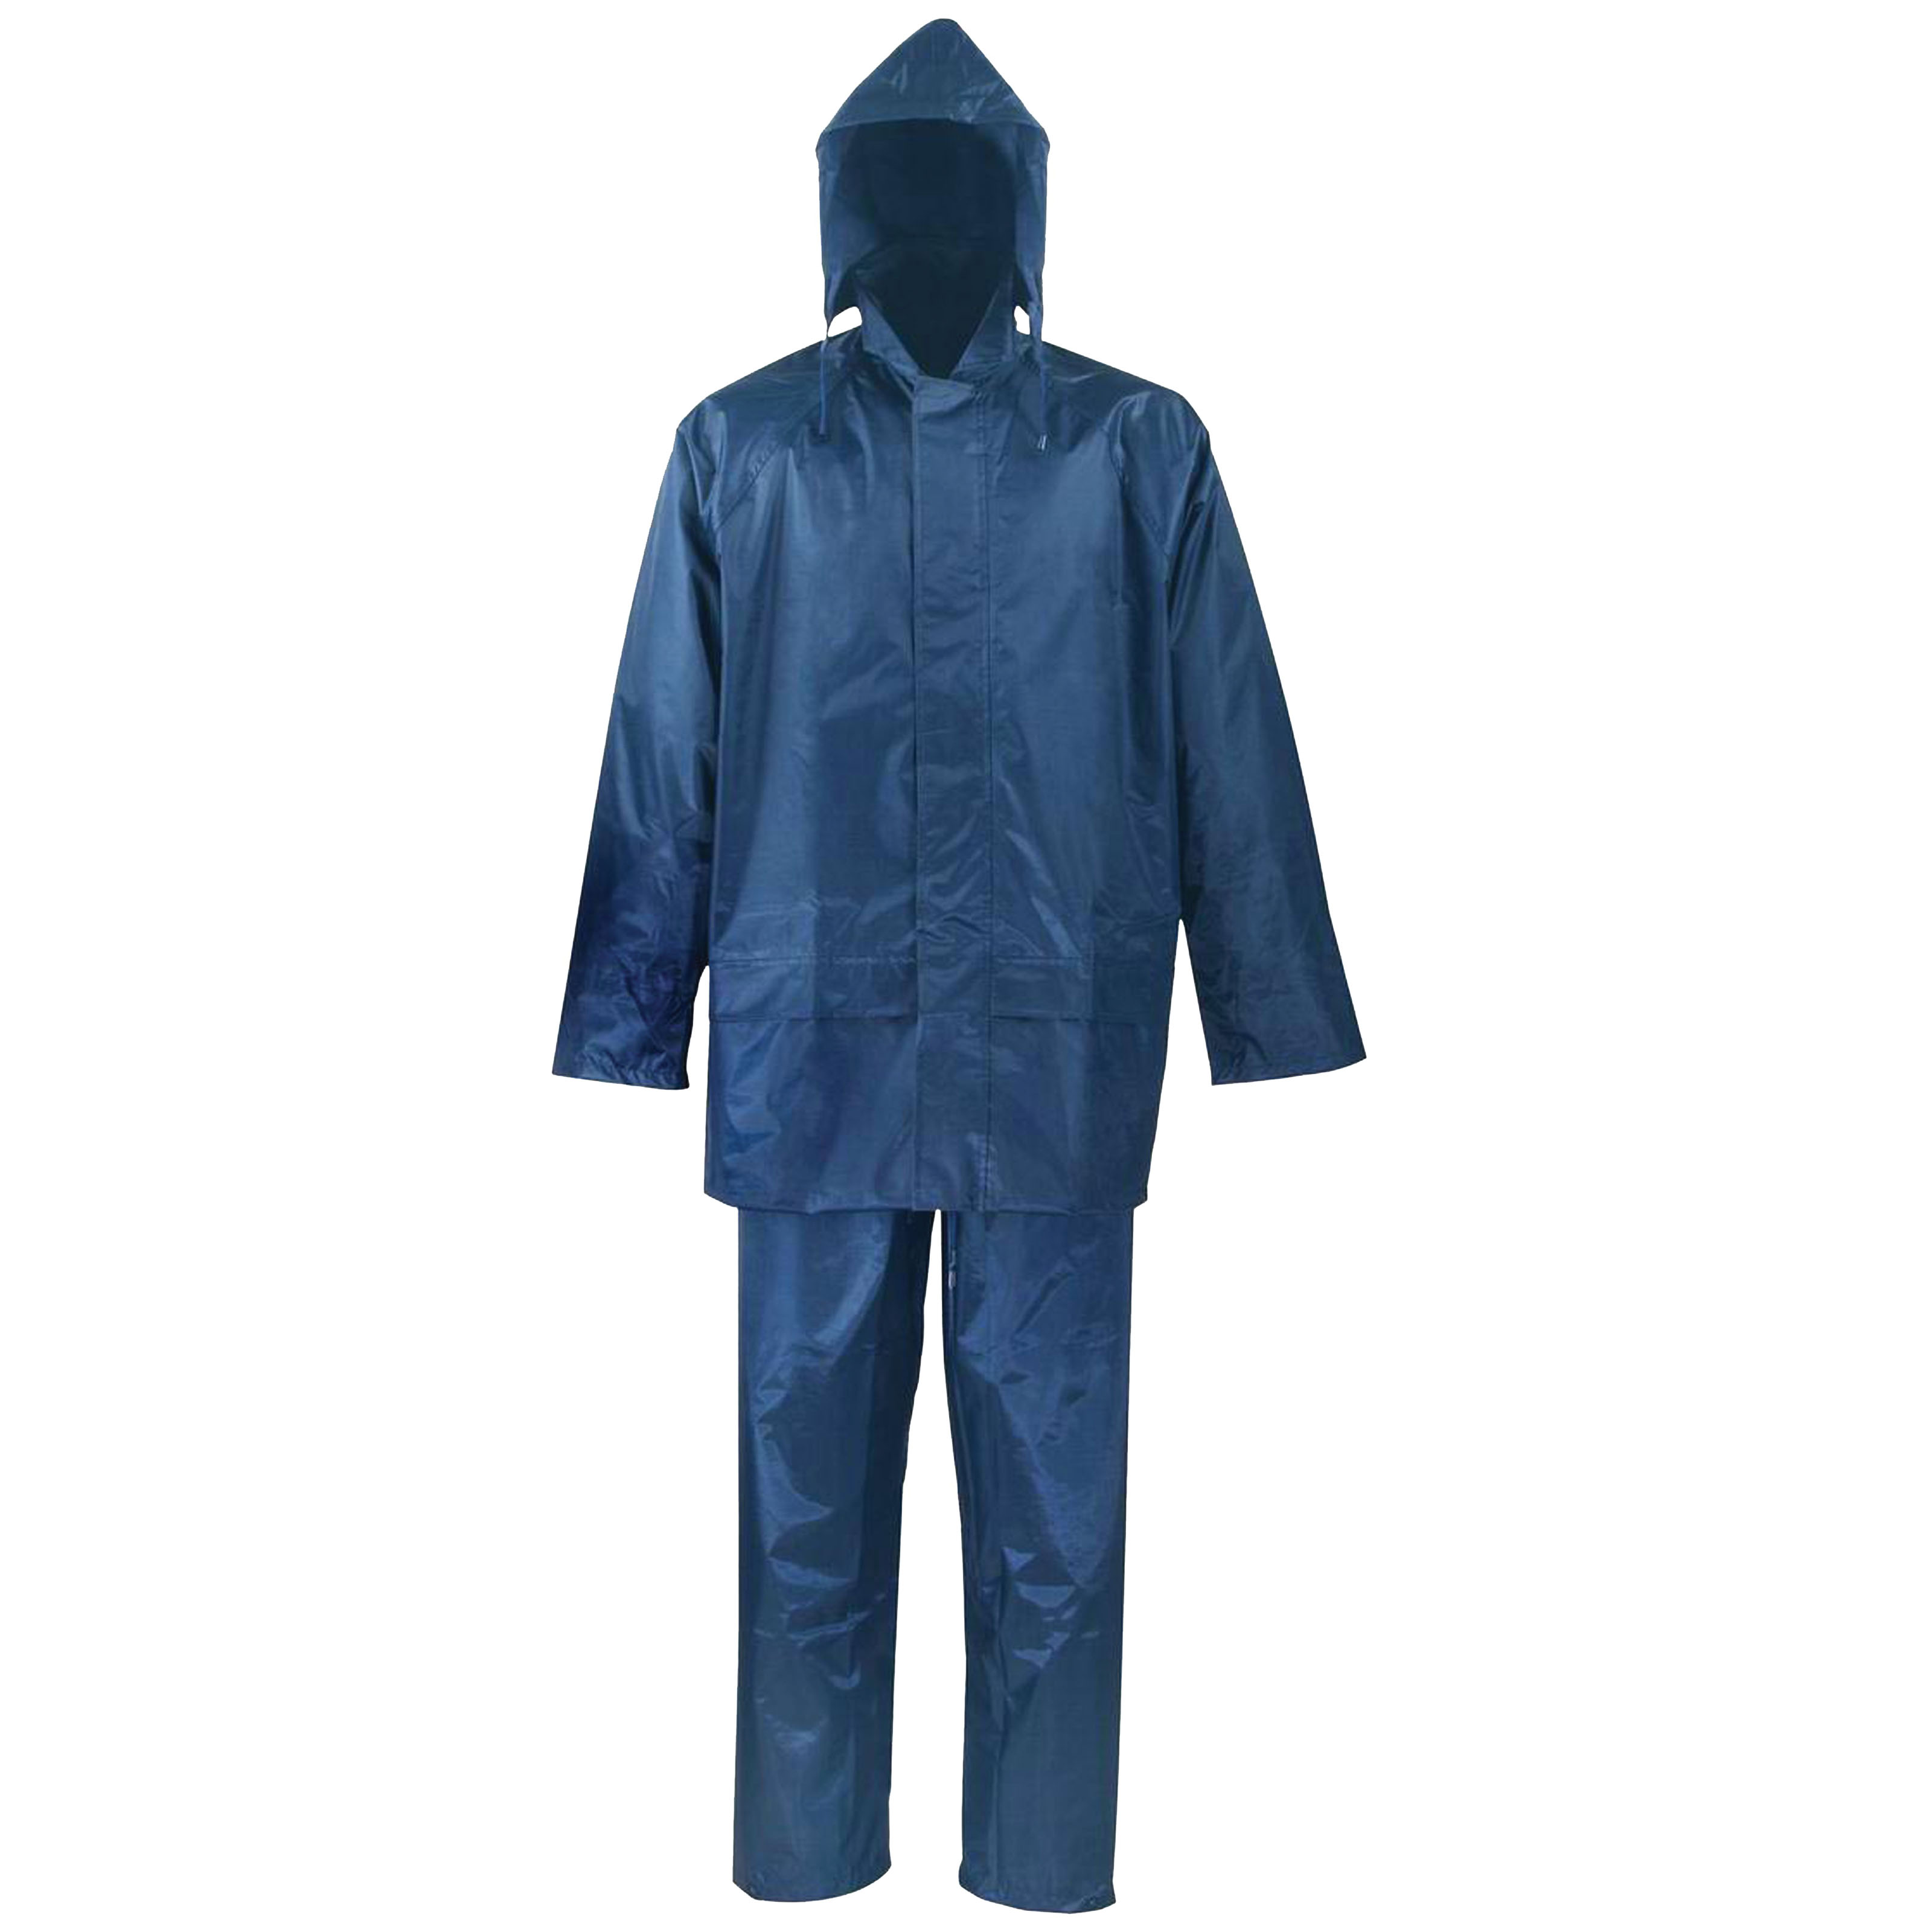 SPU045-M Rain Suit, M, 28-1/2 in Inseam, Polyester, Blue, Drawstring Pull-Out Hood Collar